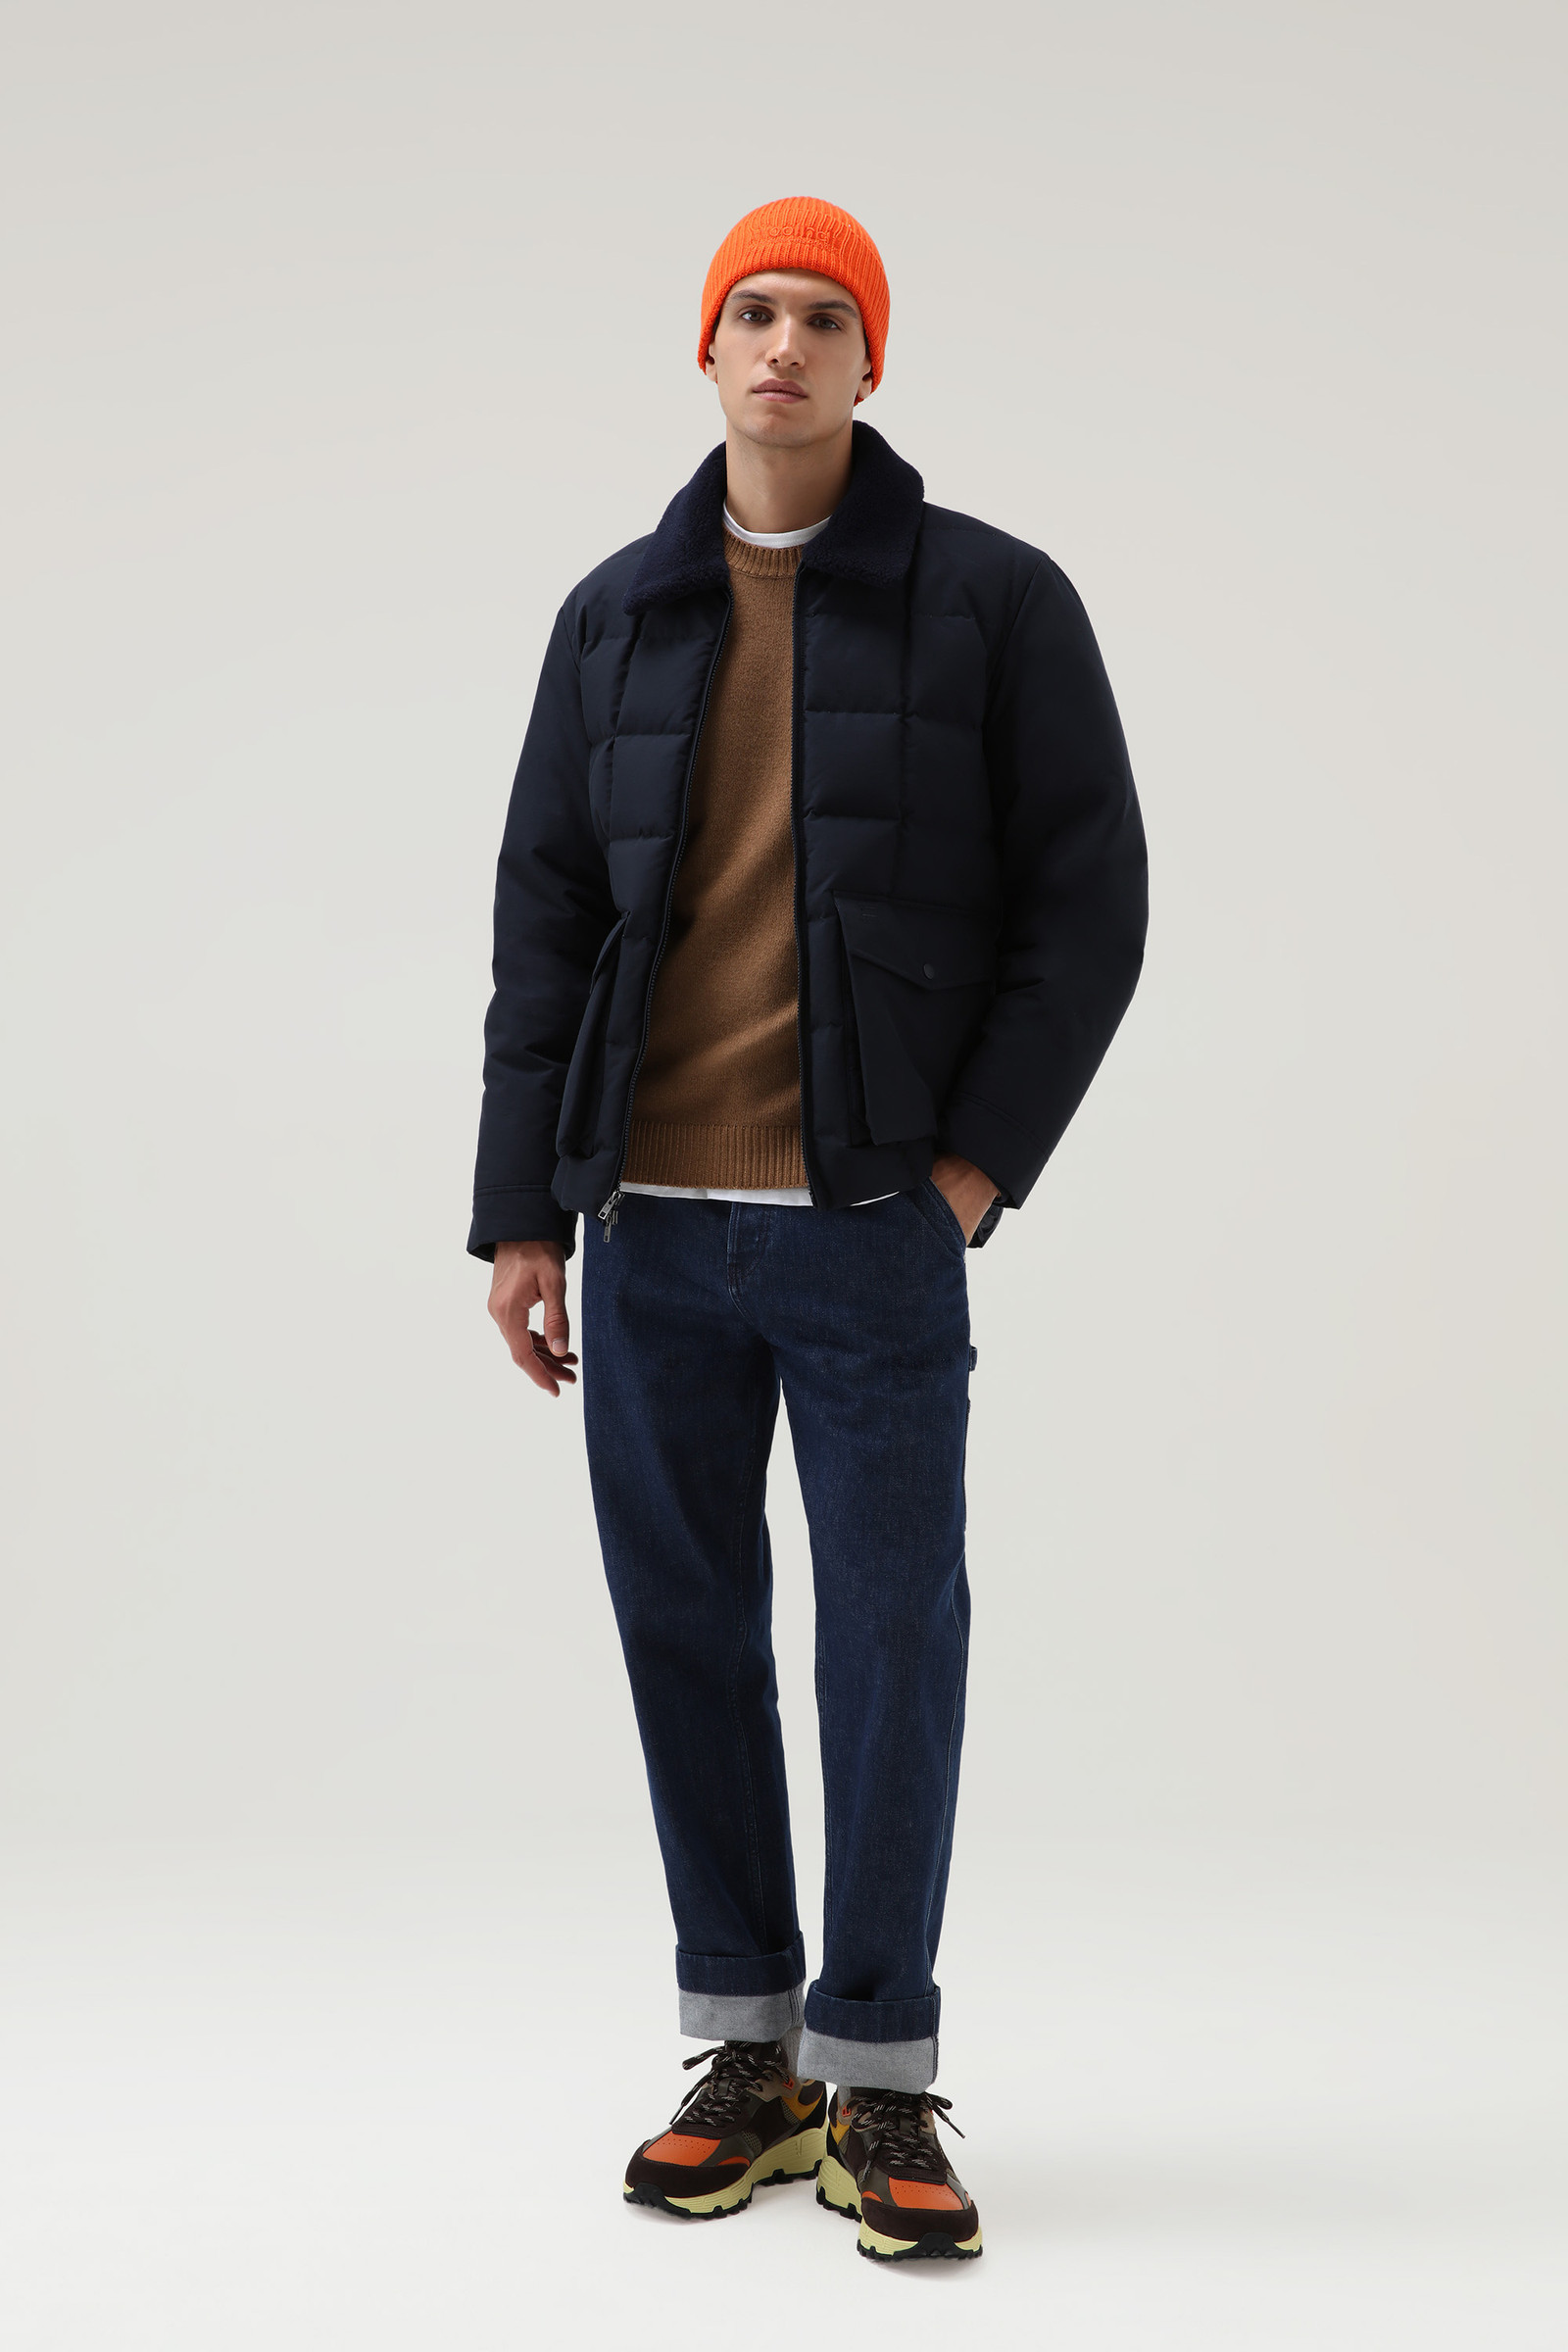 Men's Blizzard Duster Quilted Jacket in Eco Ramar Blue | Woolrich USA